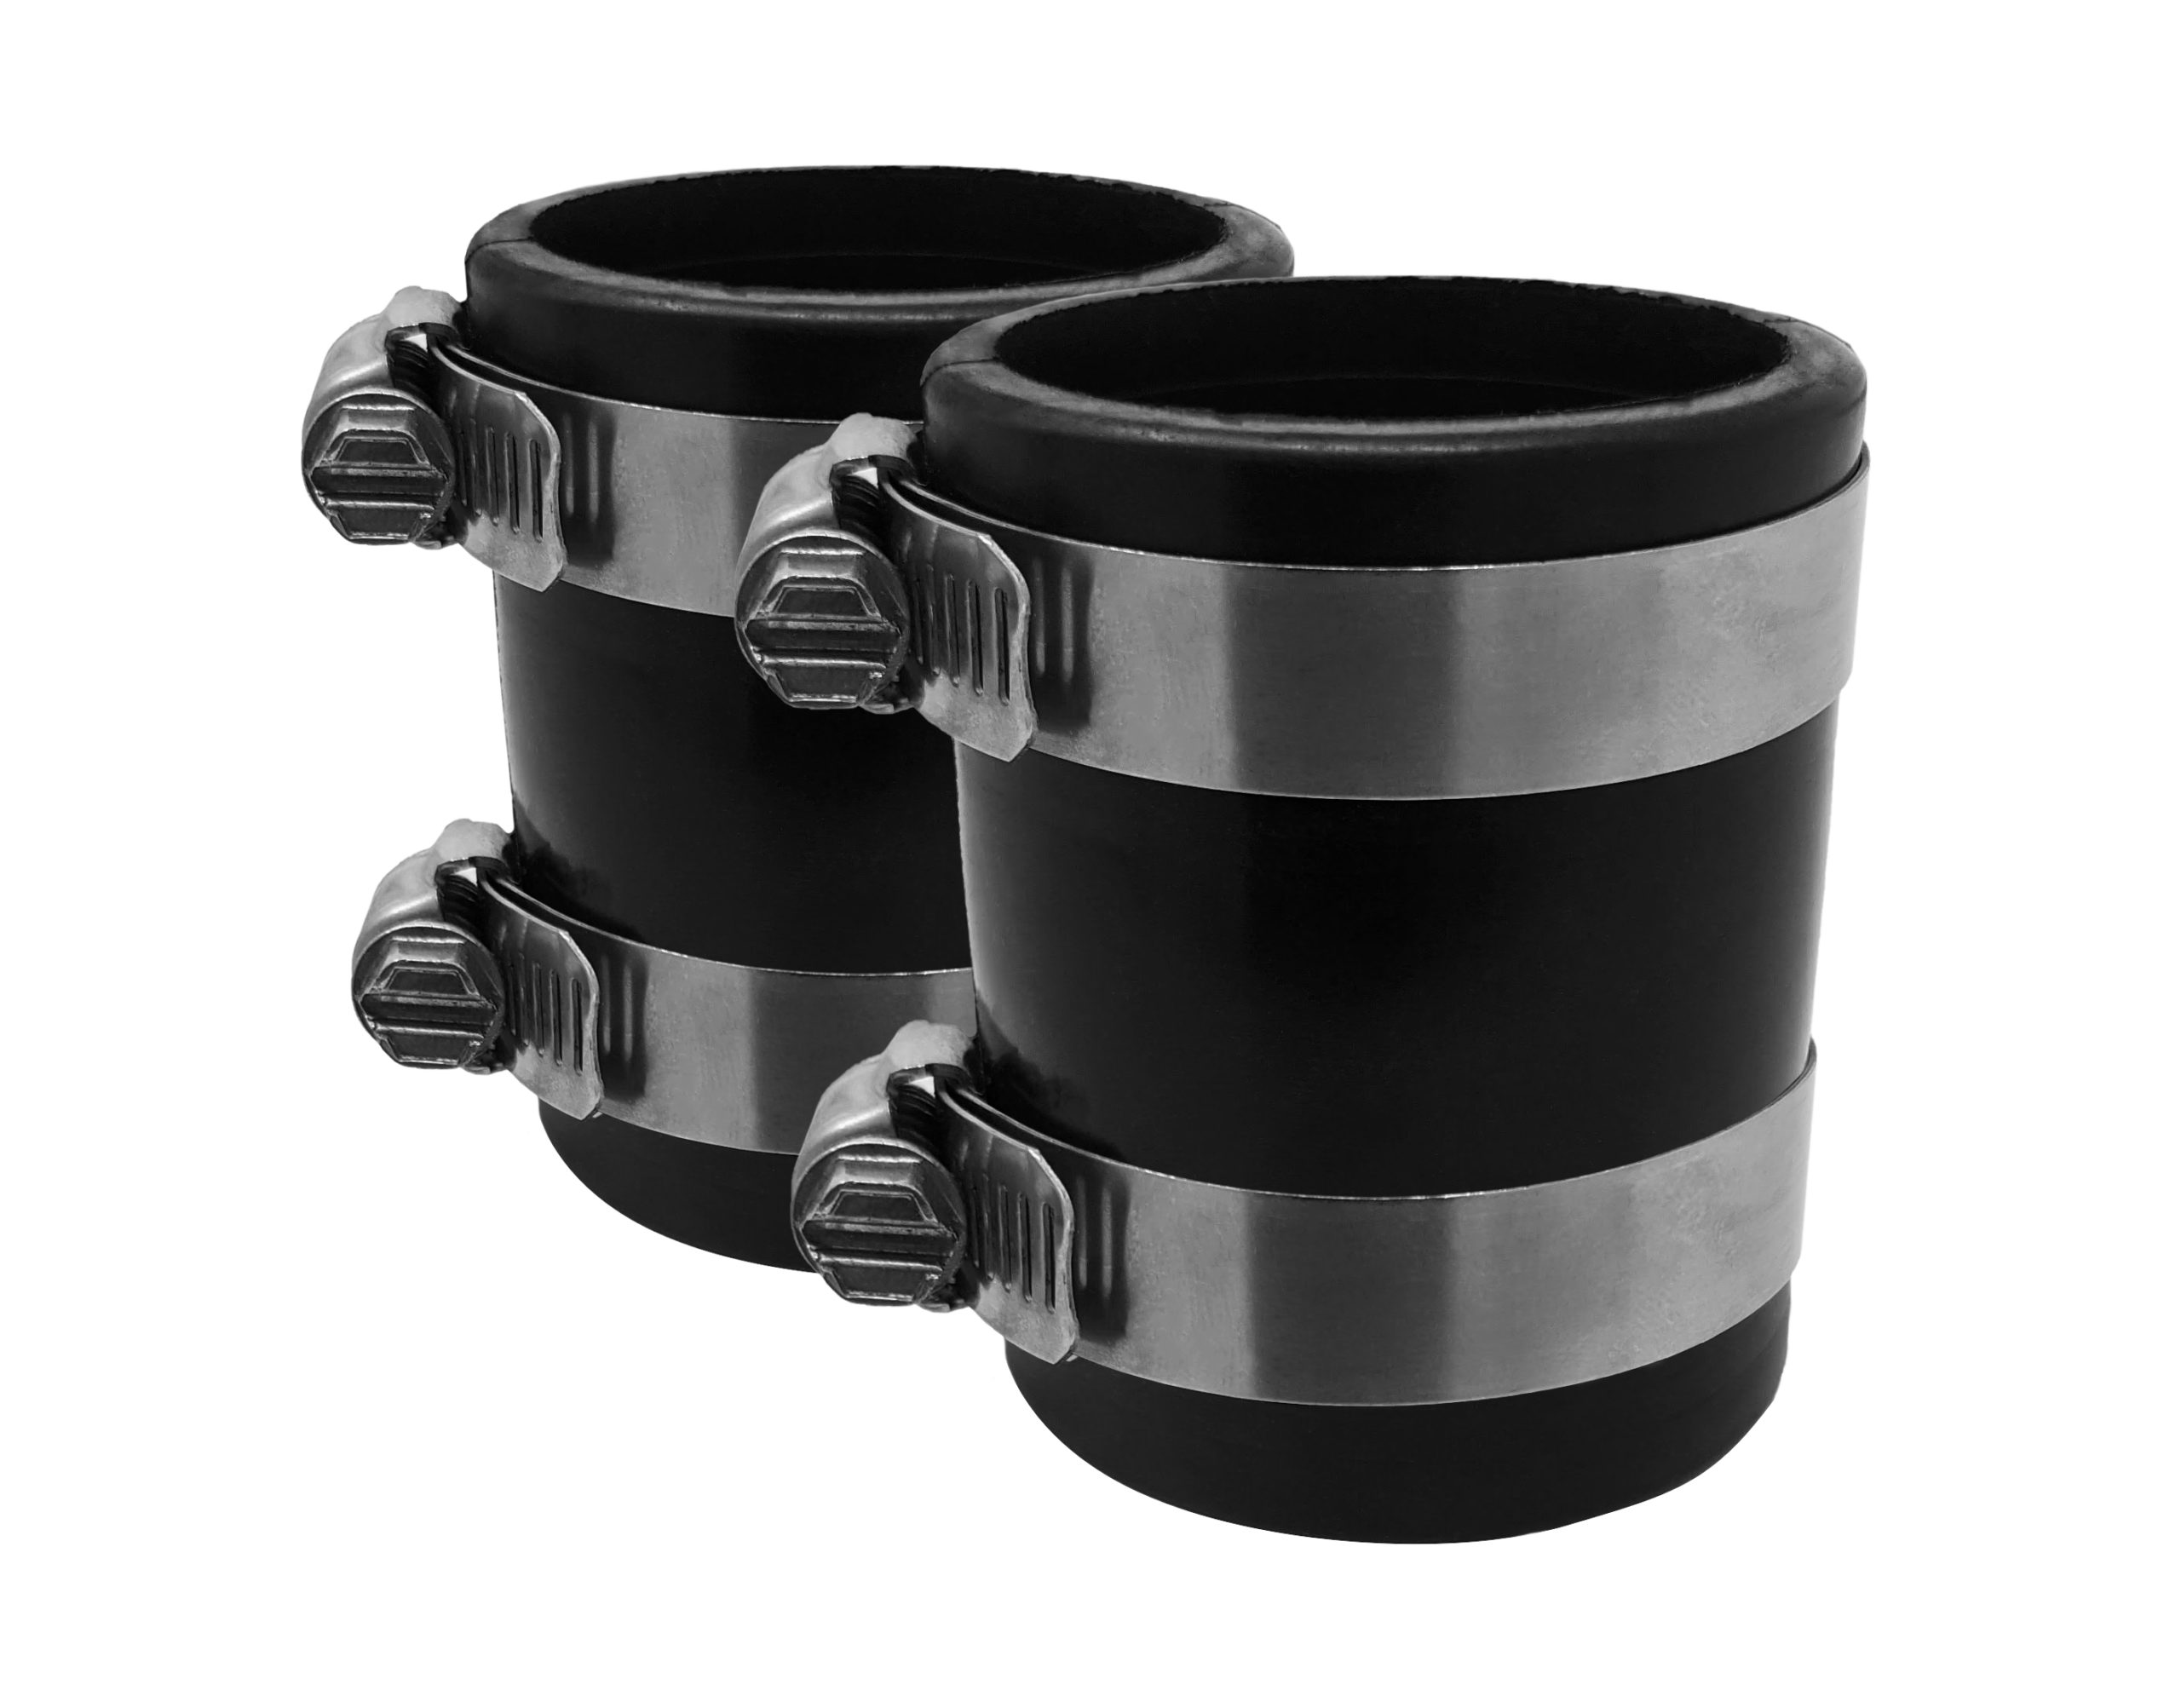 Buna-N Rubber Coupling with Stainless Steel Hose Clamps - 1.5 Inch (2 Pack)